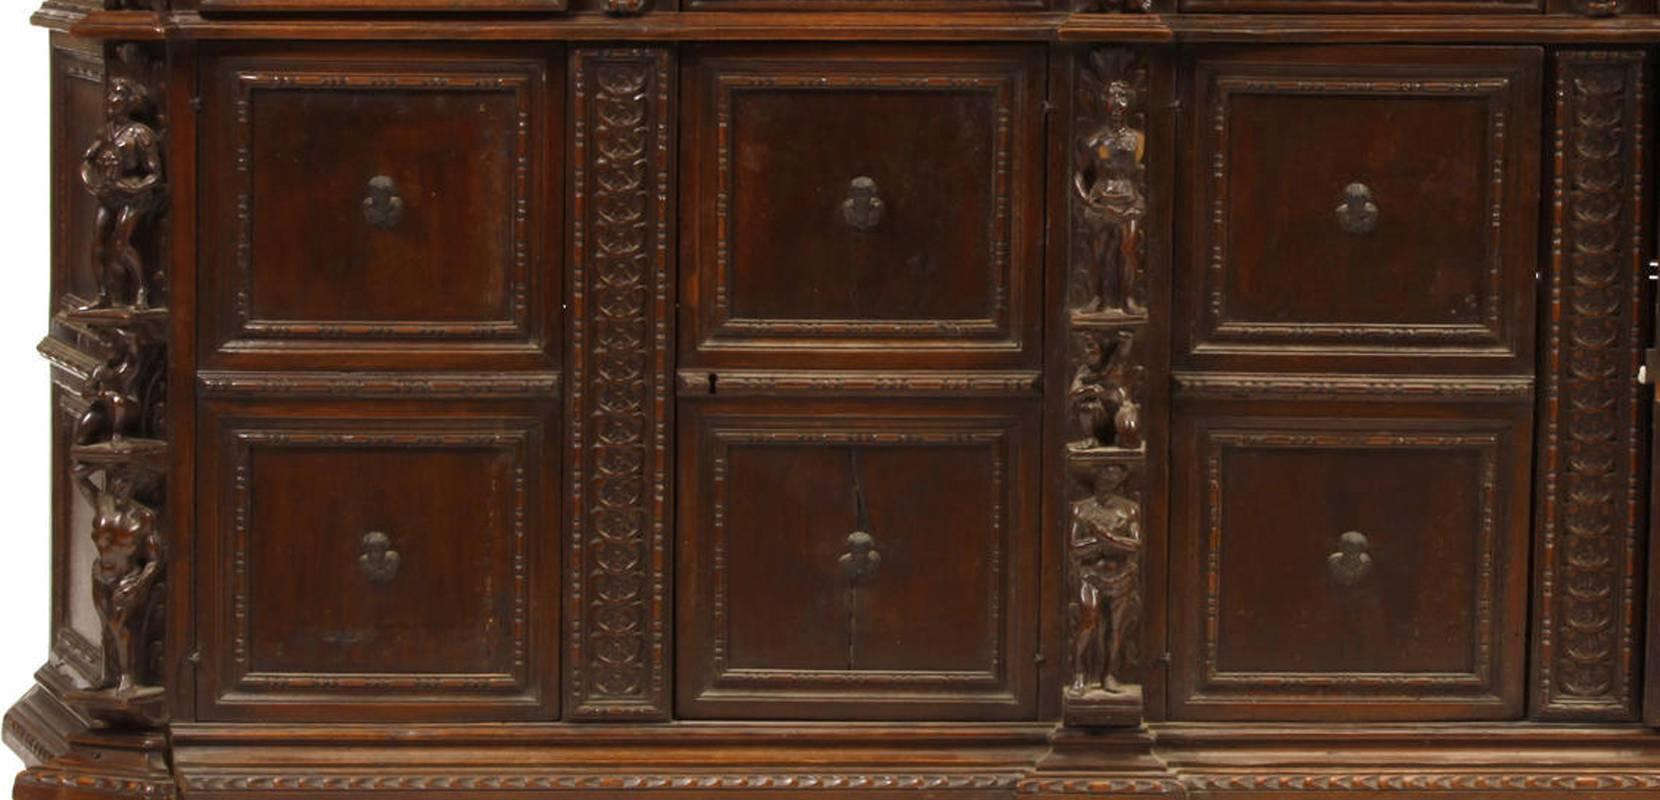 Magnificent 19th century Italian Renaissance style carved walnut long figural credenza. Solid walnut top over a frieze containing four drawers with wooden knobs over four doors flanked and centred by finely carved Renaissance figures, all supported